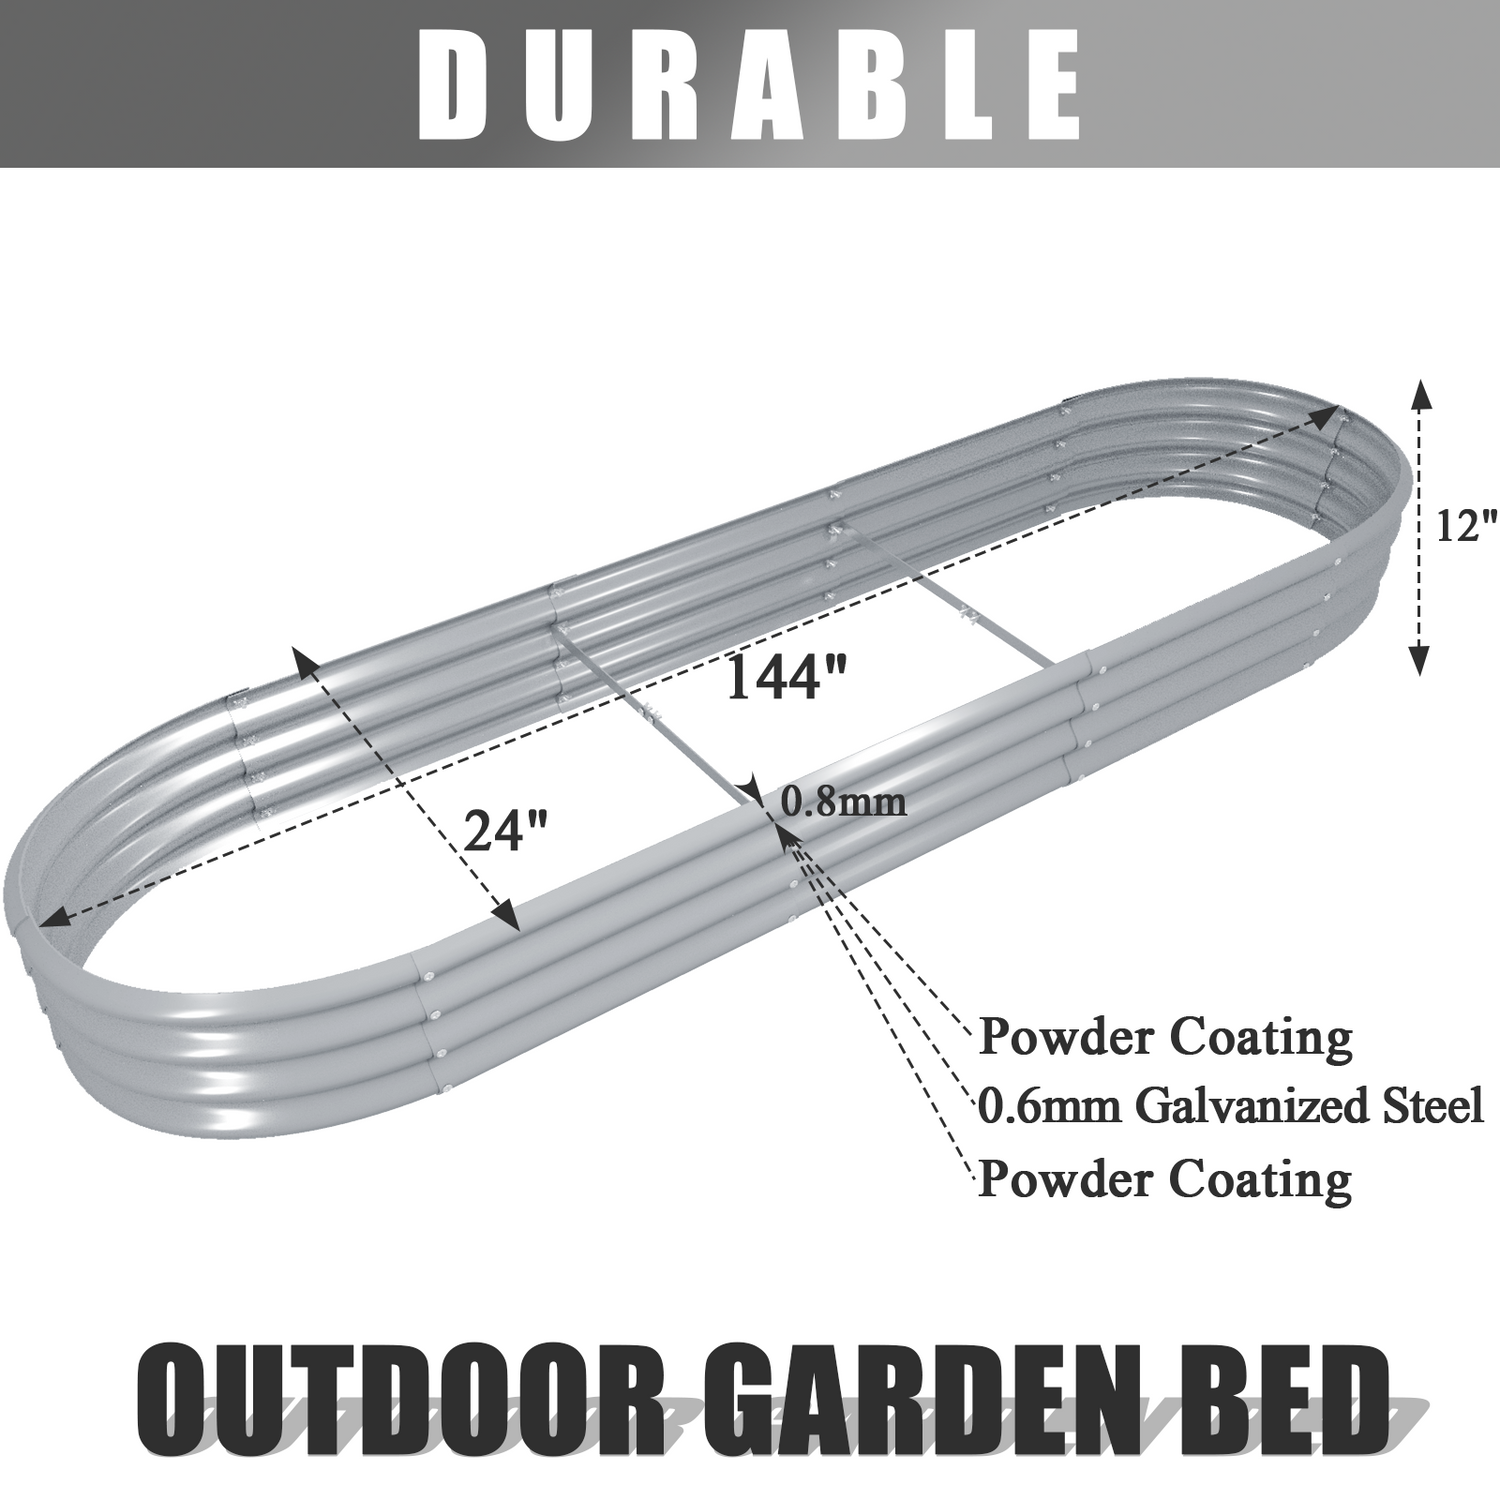 Bundle of 12 | 12" Tall 12x2ft Oval Metal Raised Garden Beds